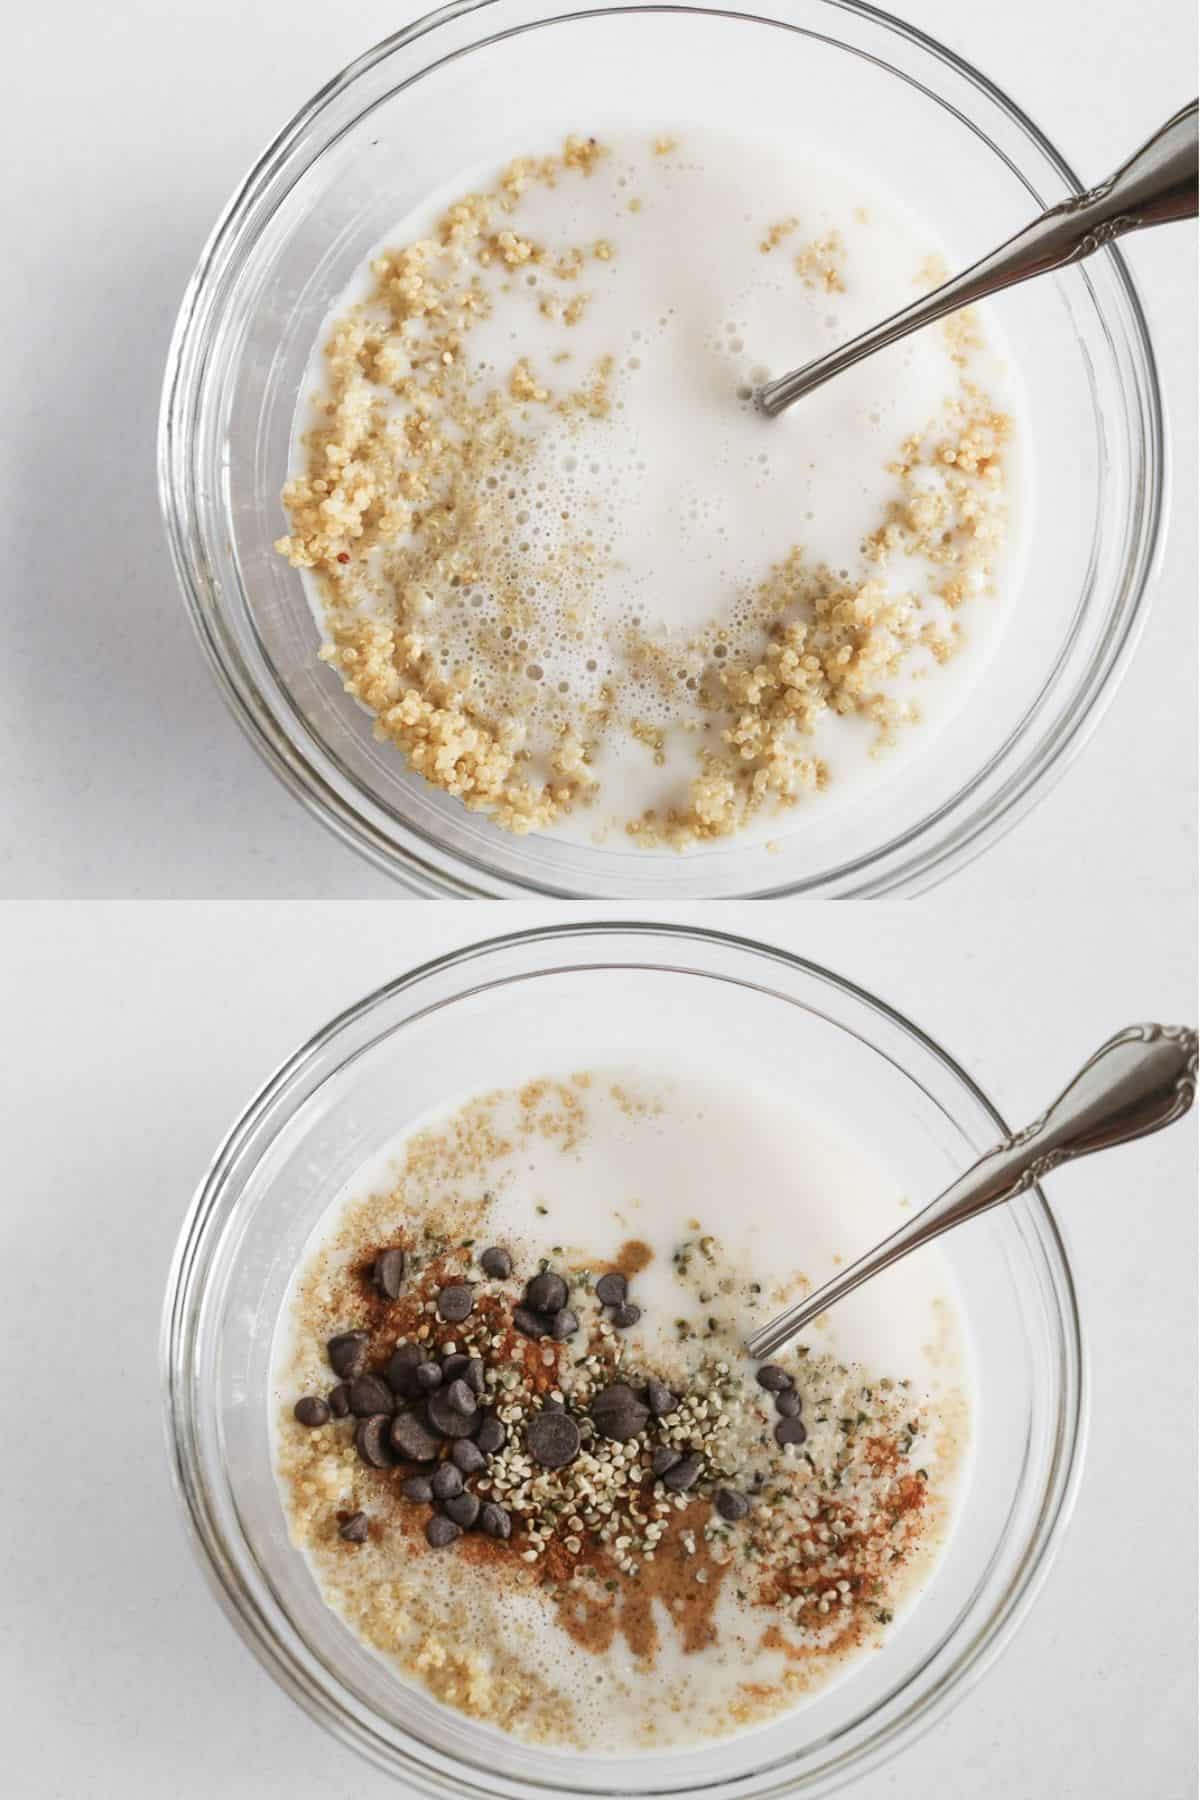 Quinoa and milk in a bowl and then other ingredients added in.